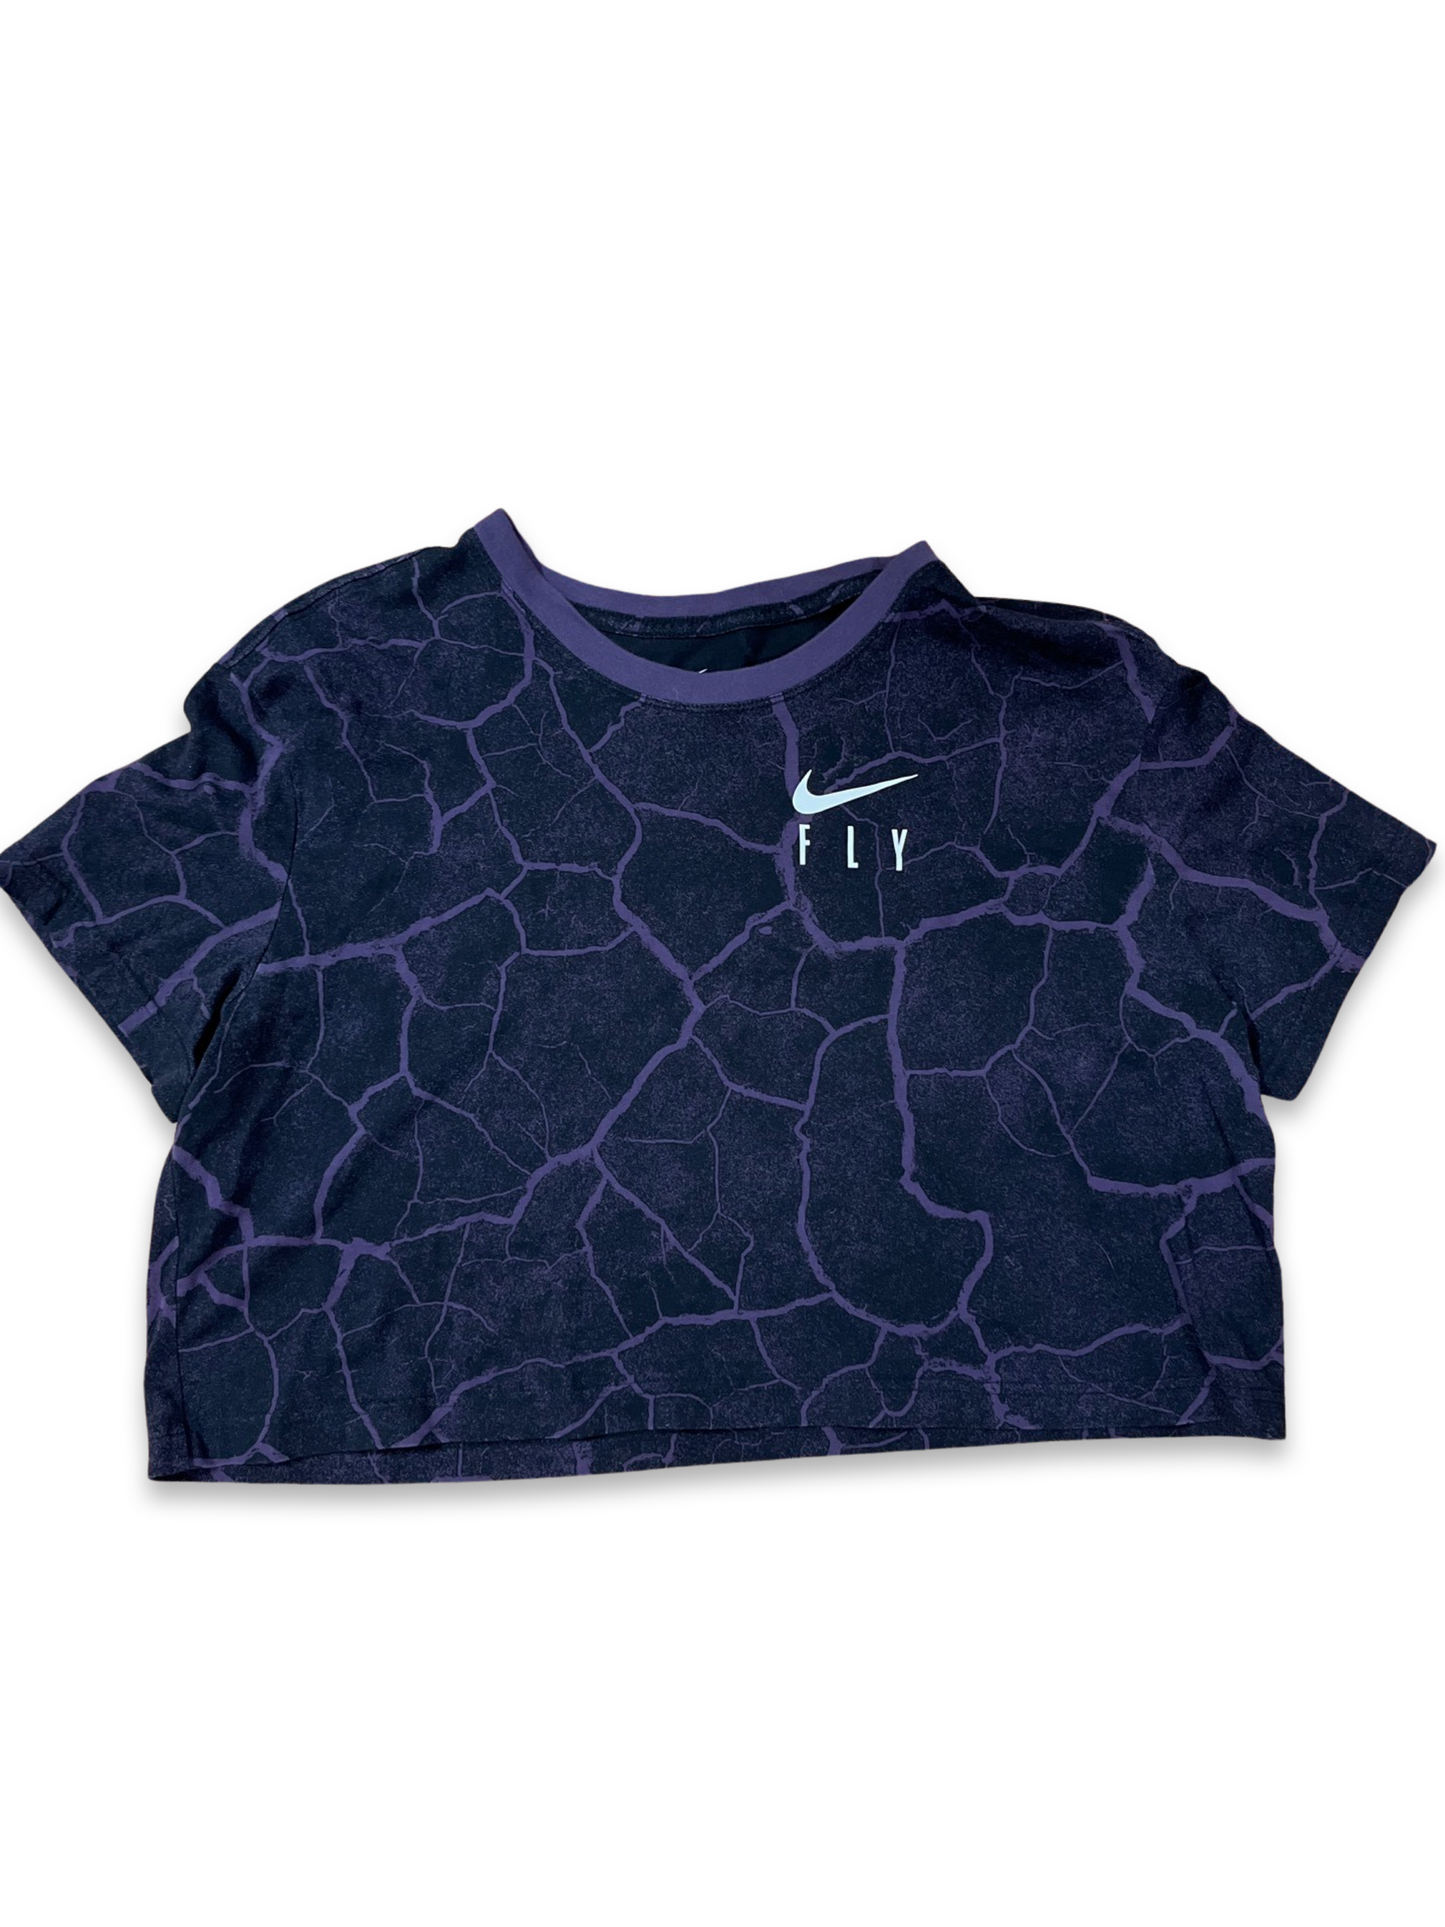 Nike Fly Cropped Tee - Black and Purple (XL)